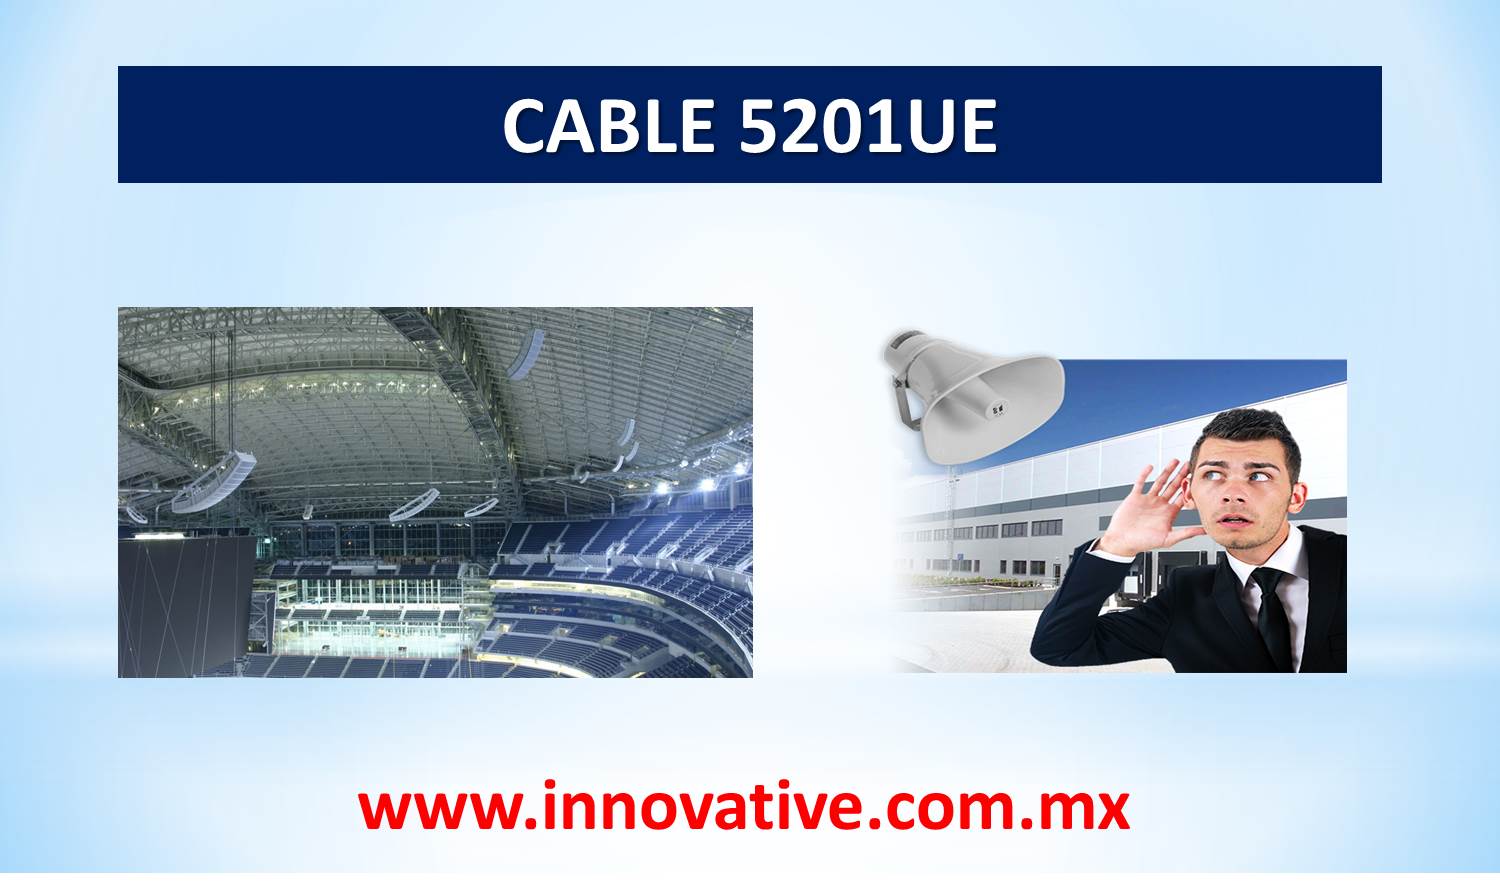 CABLE 5201UE